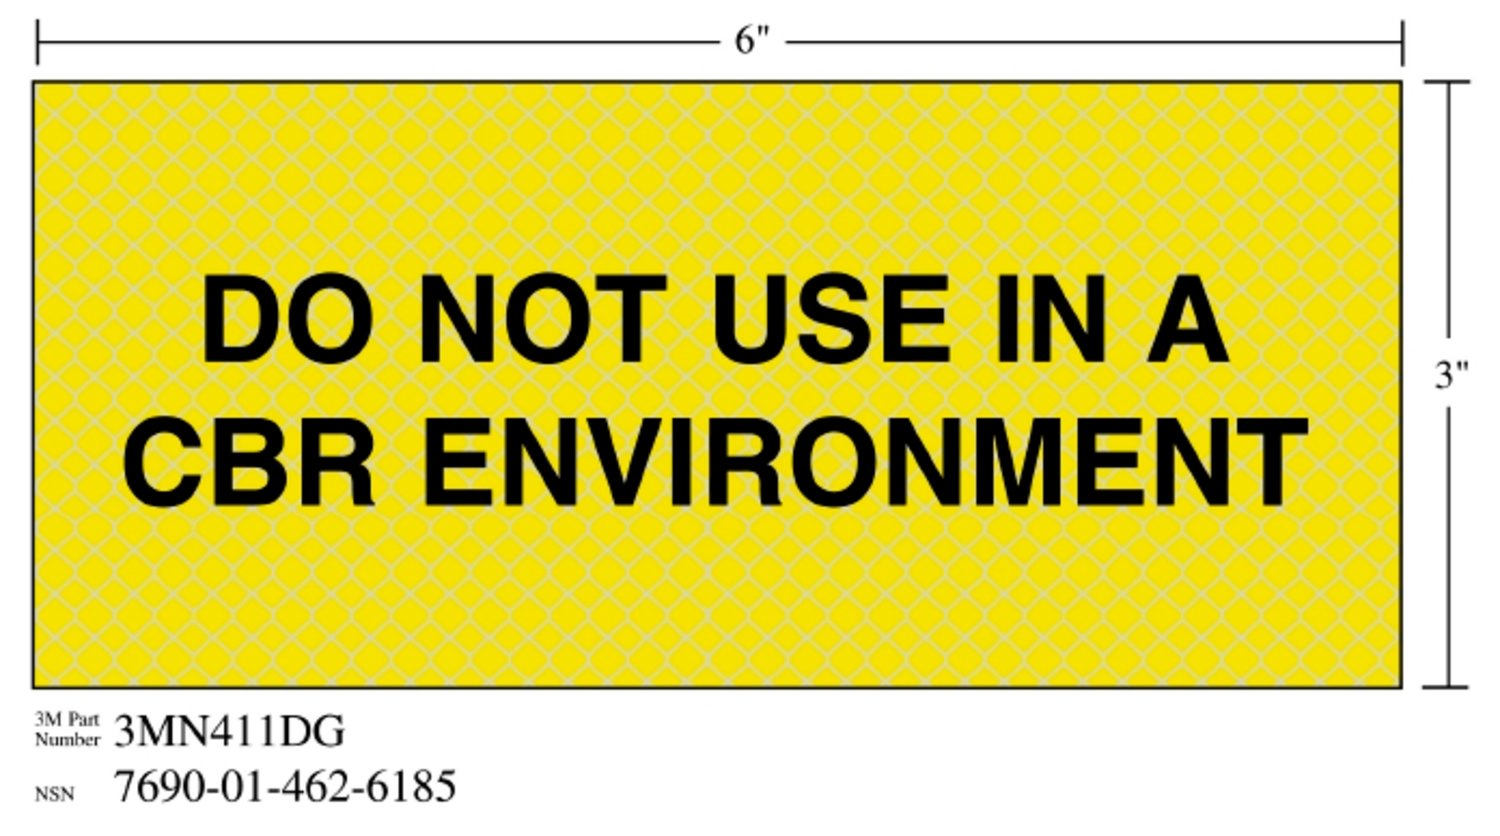 7010317789 - 3M Diamond Grade Ventilation Sign 3MN411DG, "DO Not USE", 7 in x 3 in,
10/Package